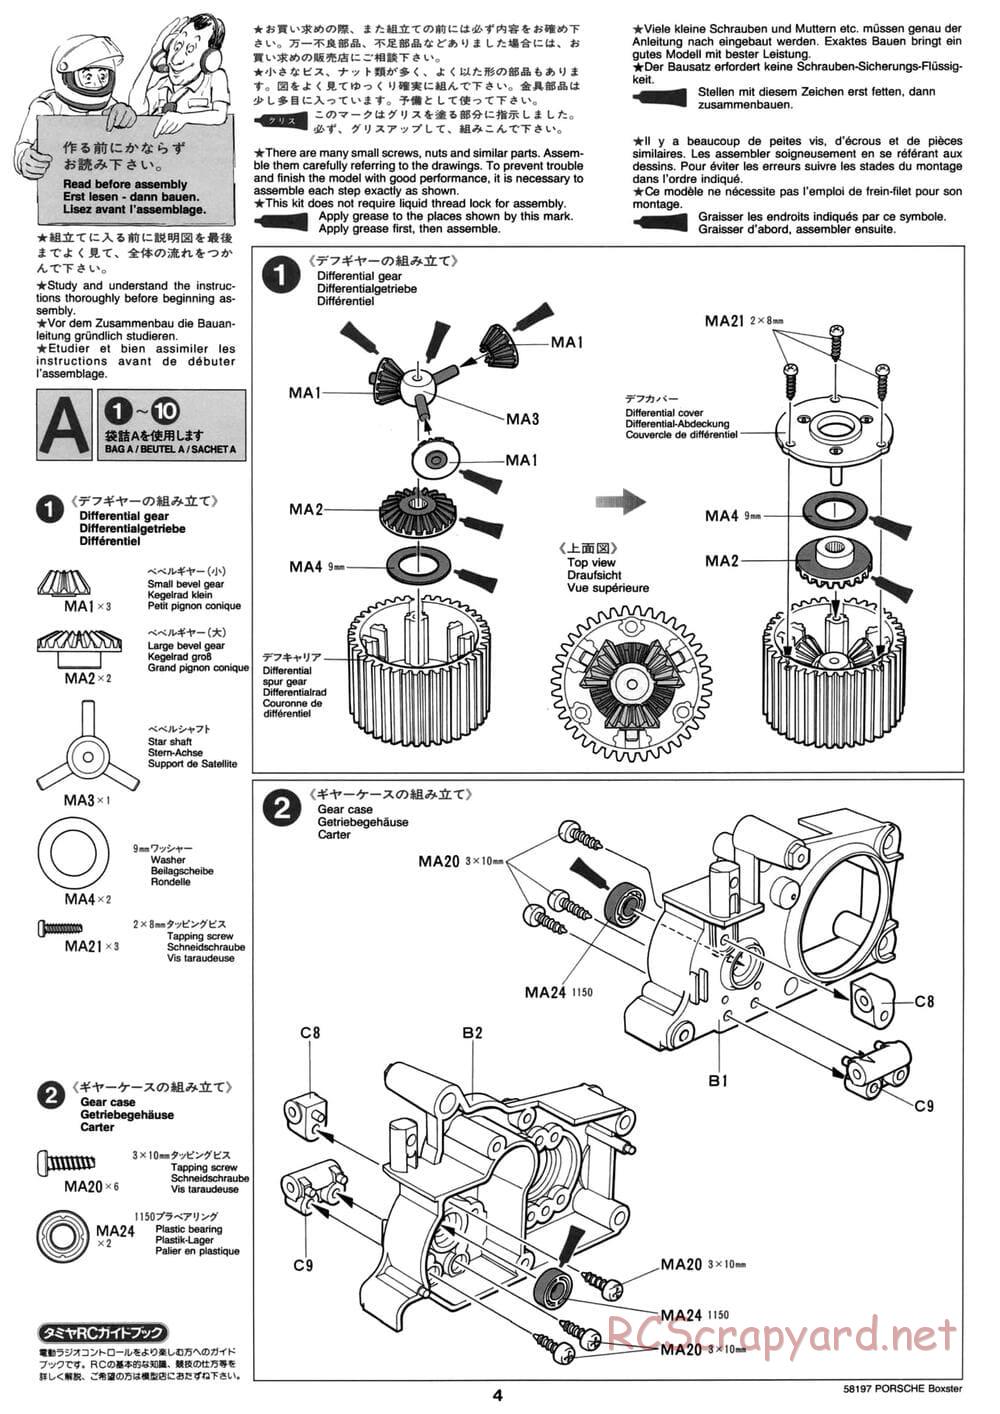 Tamiya - Porsche Boxster - M02L Chassis - Manual - Page 4